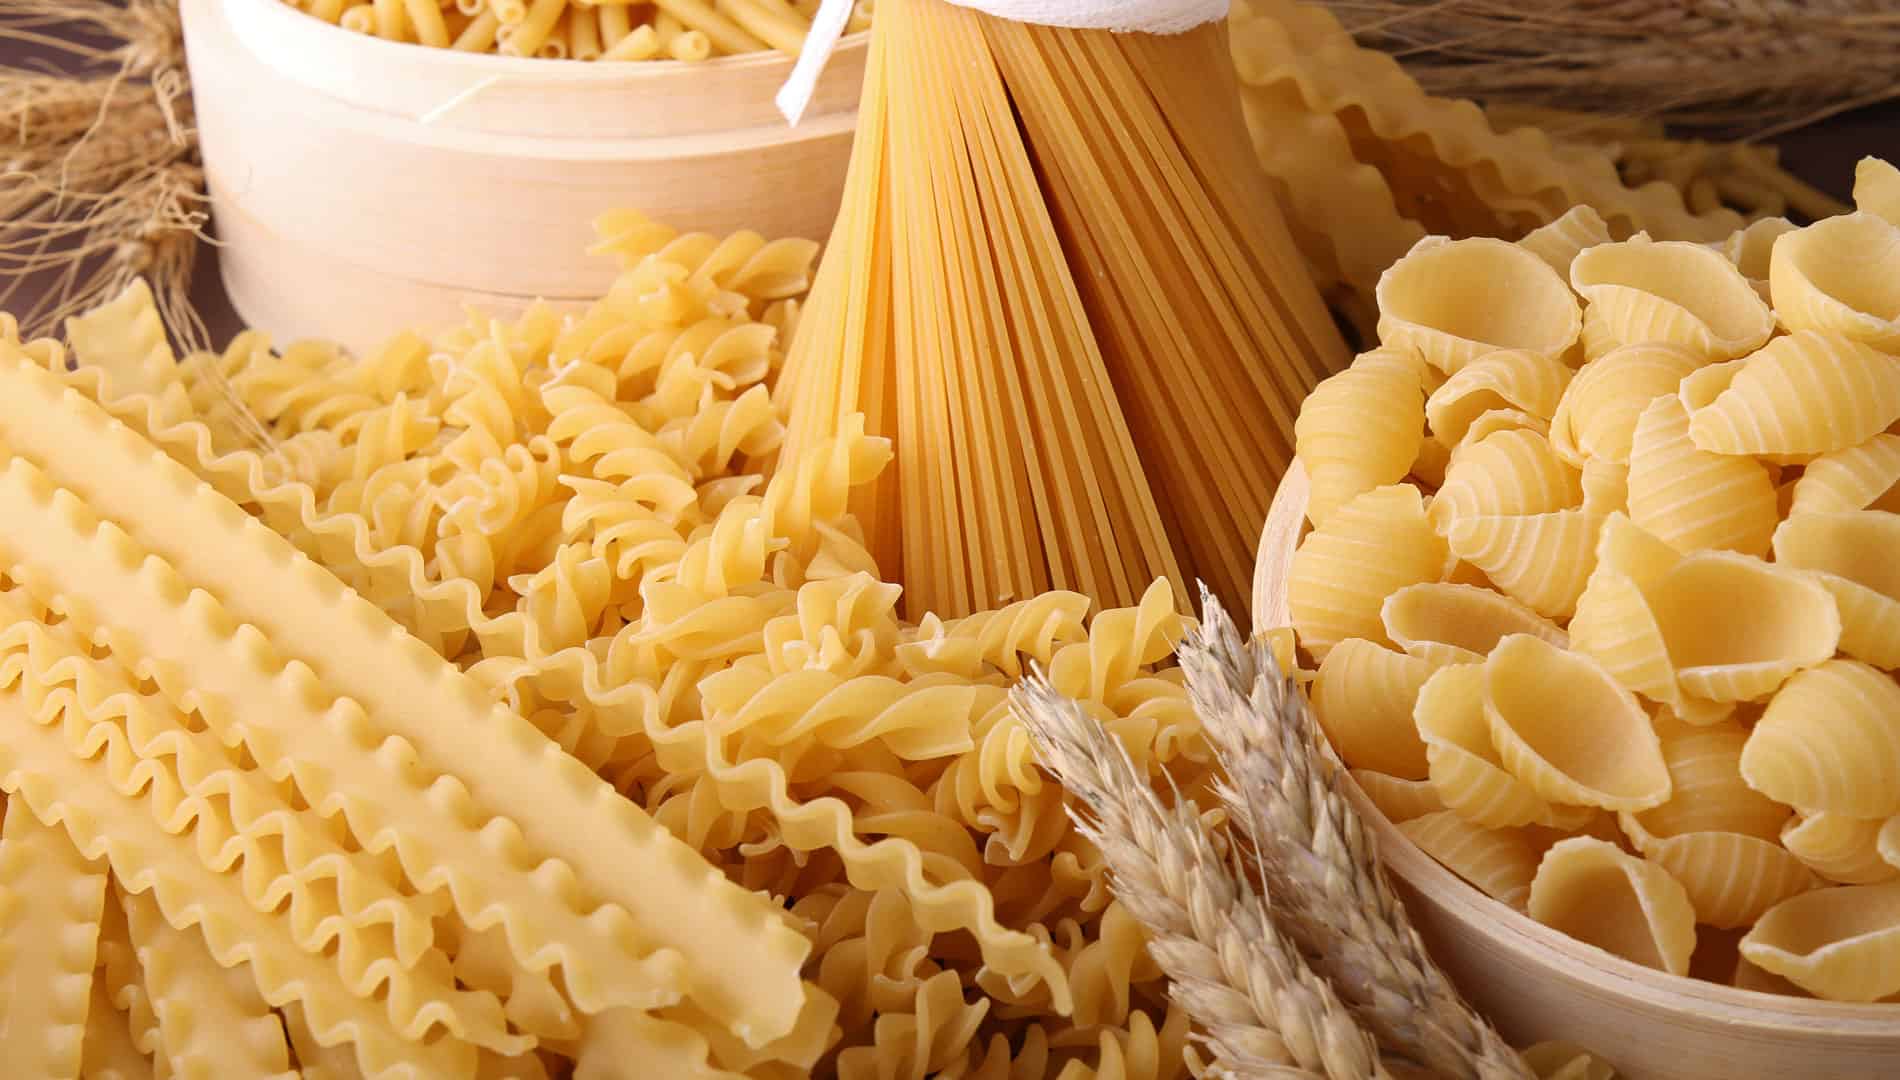 http://www.playbuzz.com/jovita10/what-kind-of-pasta-are-you